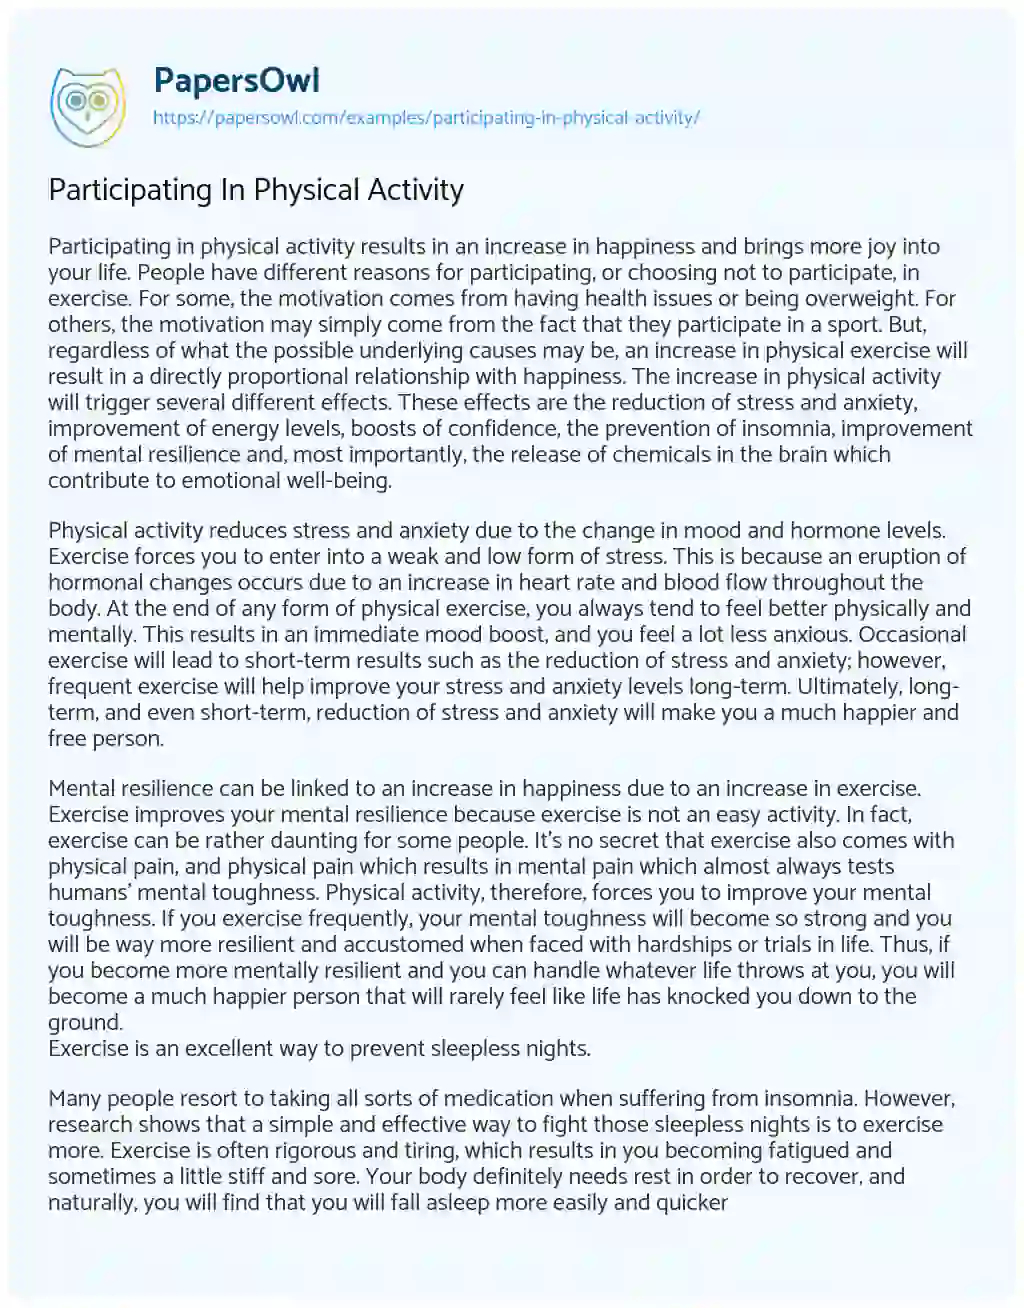 Participating in Physical Activity essay